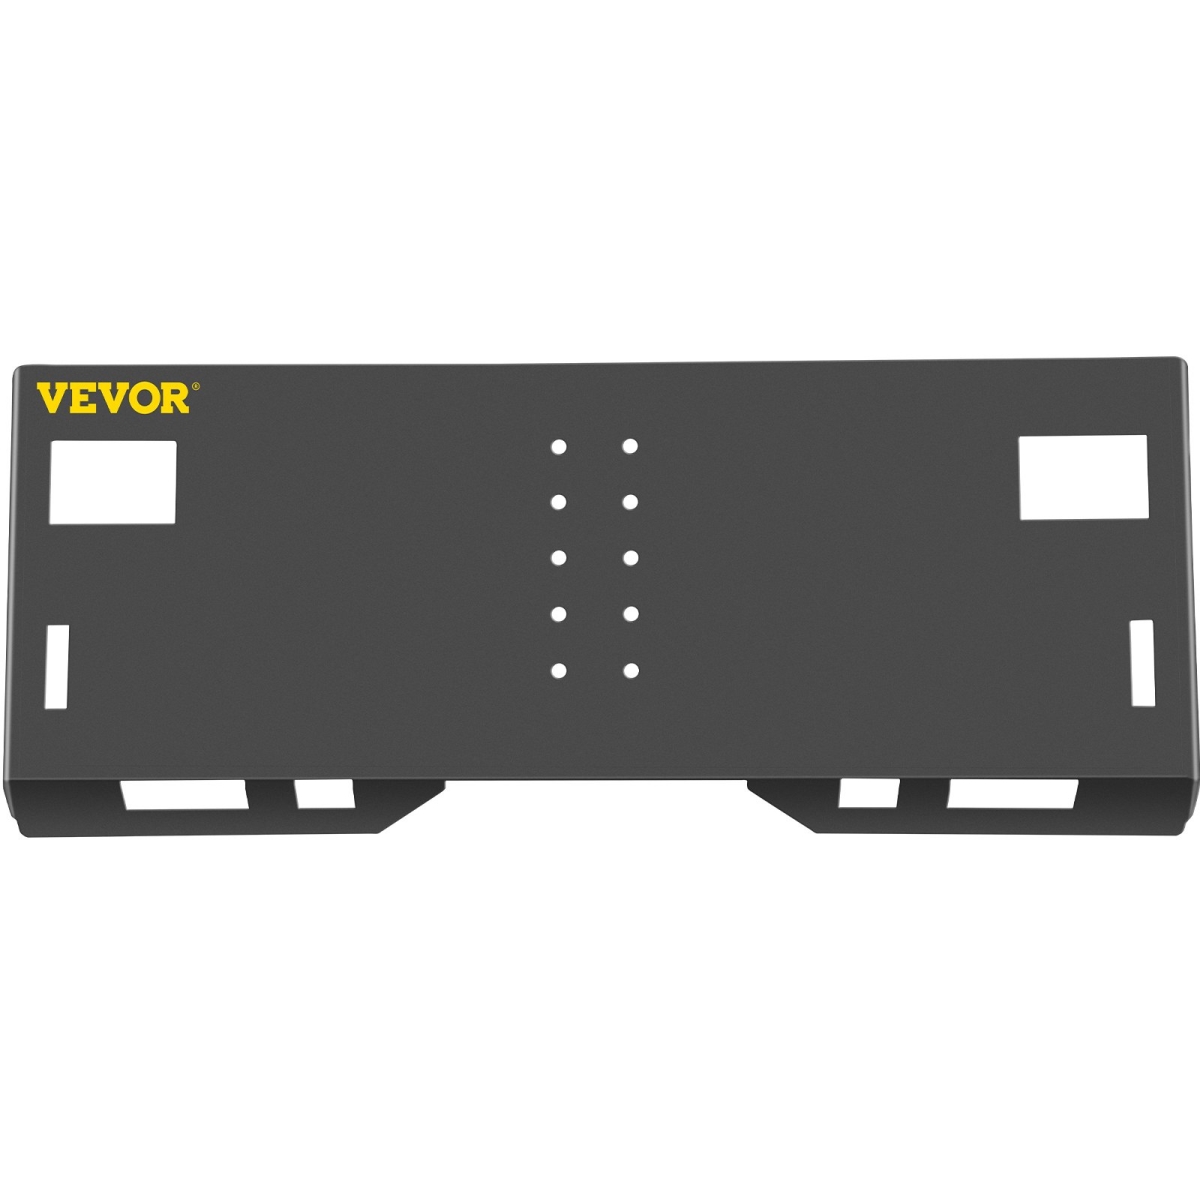 Picture of Vevor FHZXAZBJSSKK-BAH2V0 Universal Skid Steer Mount Plate 0.18 in. Thick Skid Steer Plate Attachment 3000 lbs Weight Capacity Quick Attach Mount Plate Adapter Loader